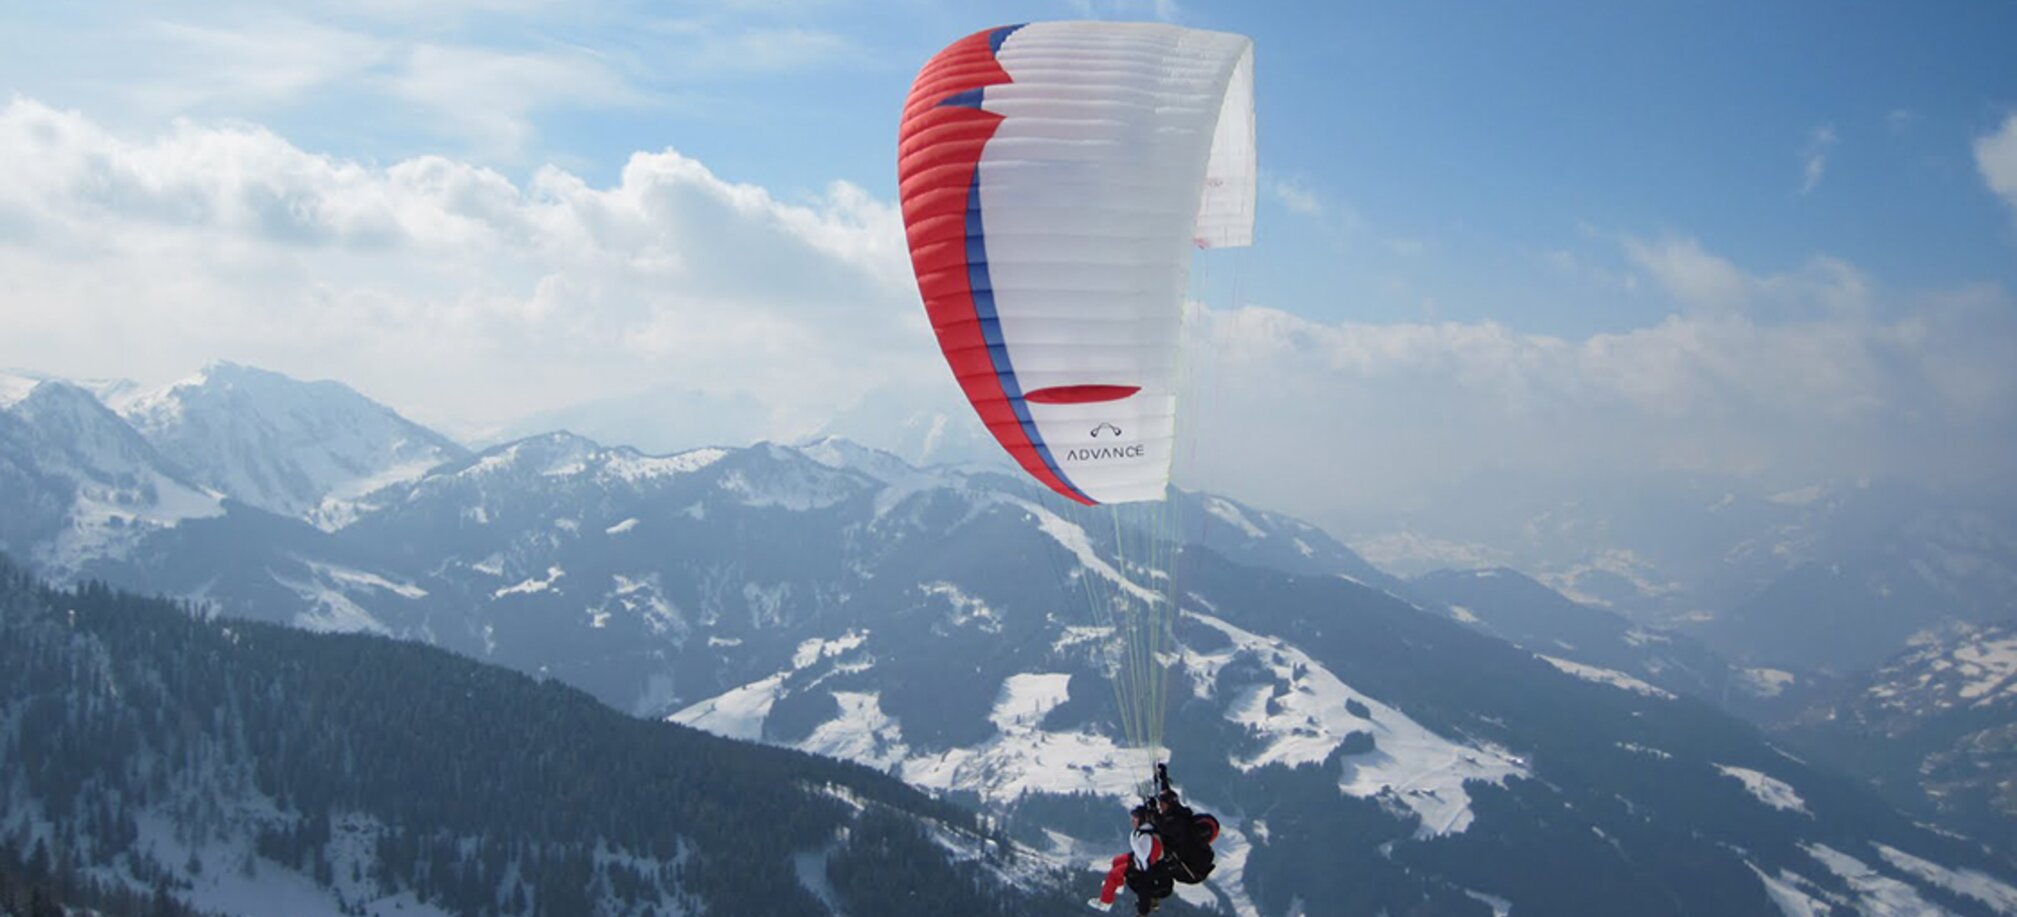 Paraglider with red, blue and white glider flies over mountains covered in forest and snowy pistes